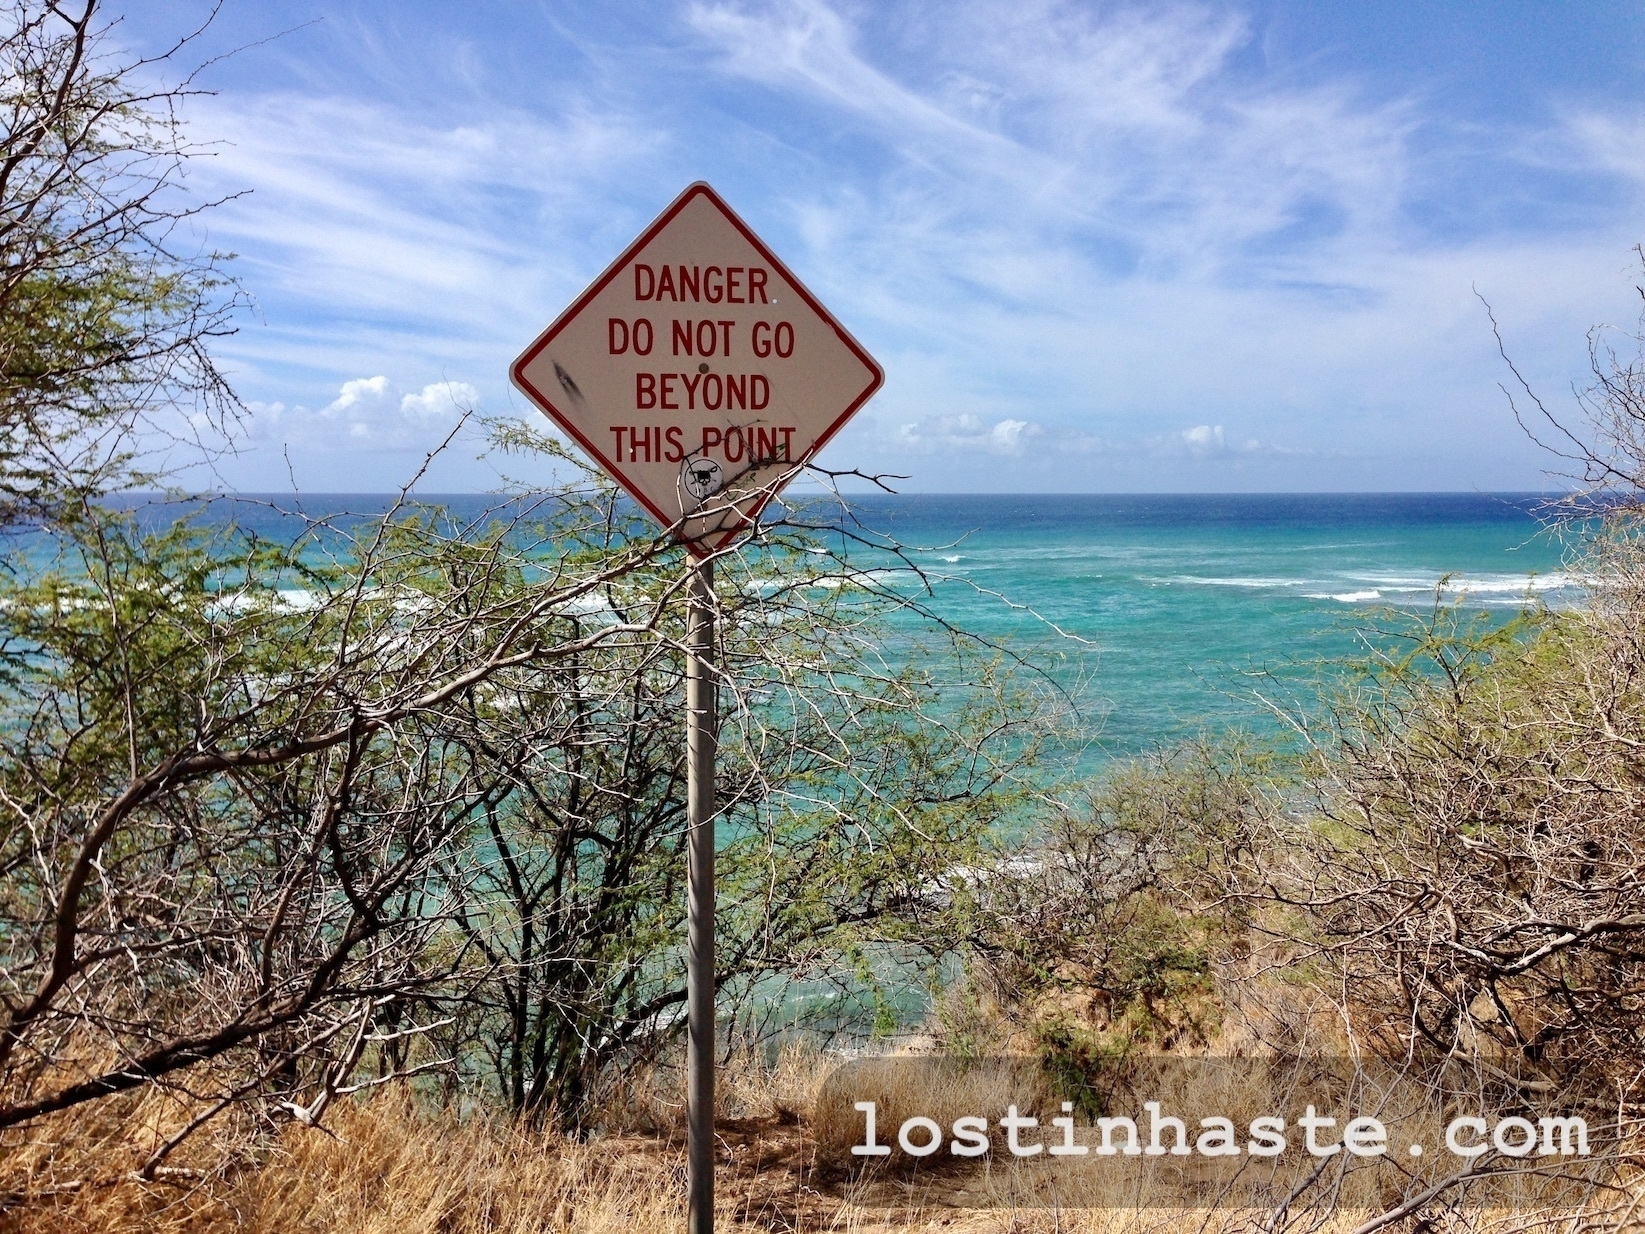 A warning sign reads 'DANGER DO NOT GO BEYOND THIS POINT' against a backdrop of tropical sea and sky. The website address 'lostinmhaste.com' is visible.